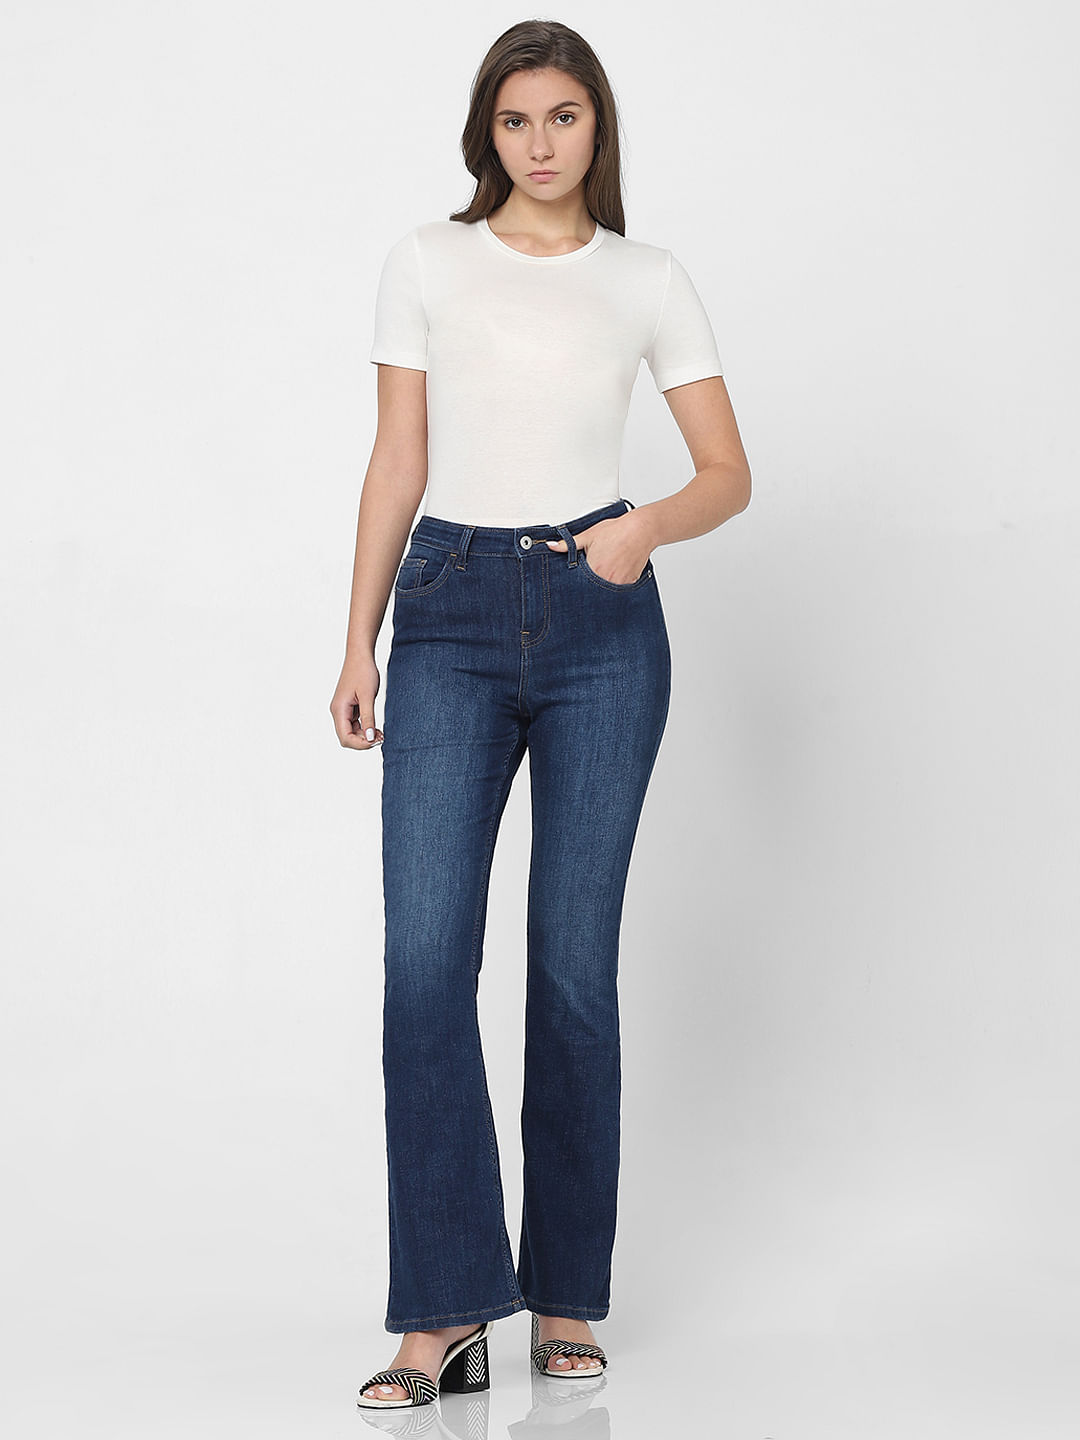 WMNS Floral Embroidered Insert Bell Bottom Jeans - Dark Blue